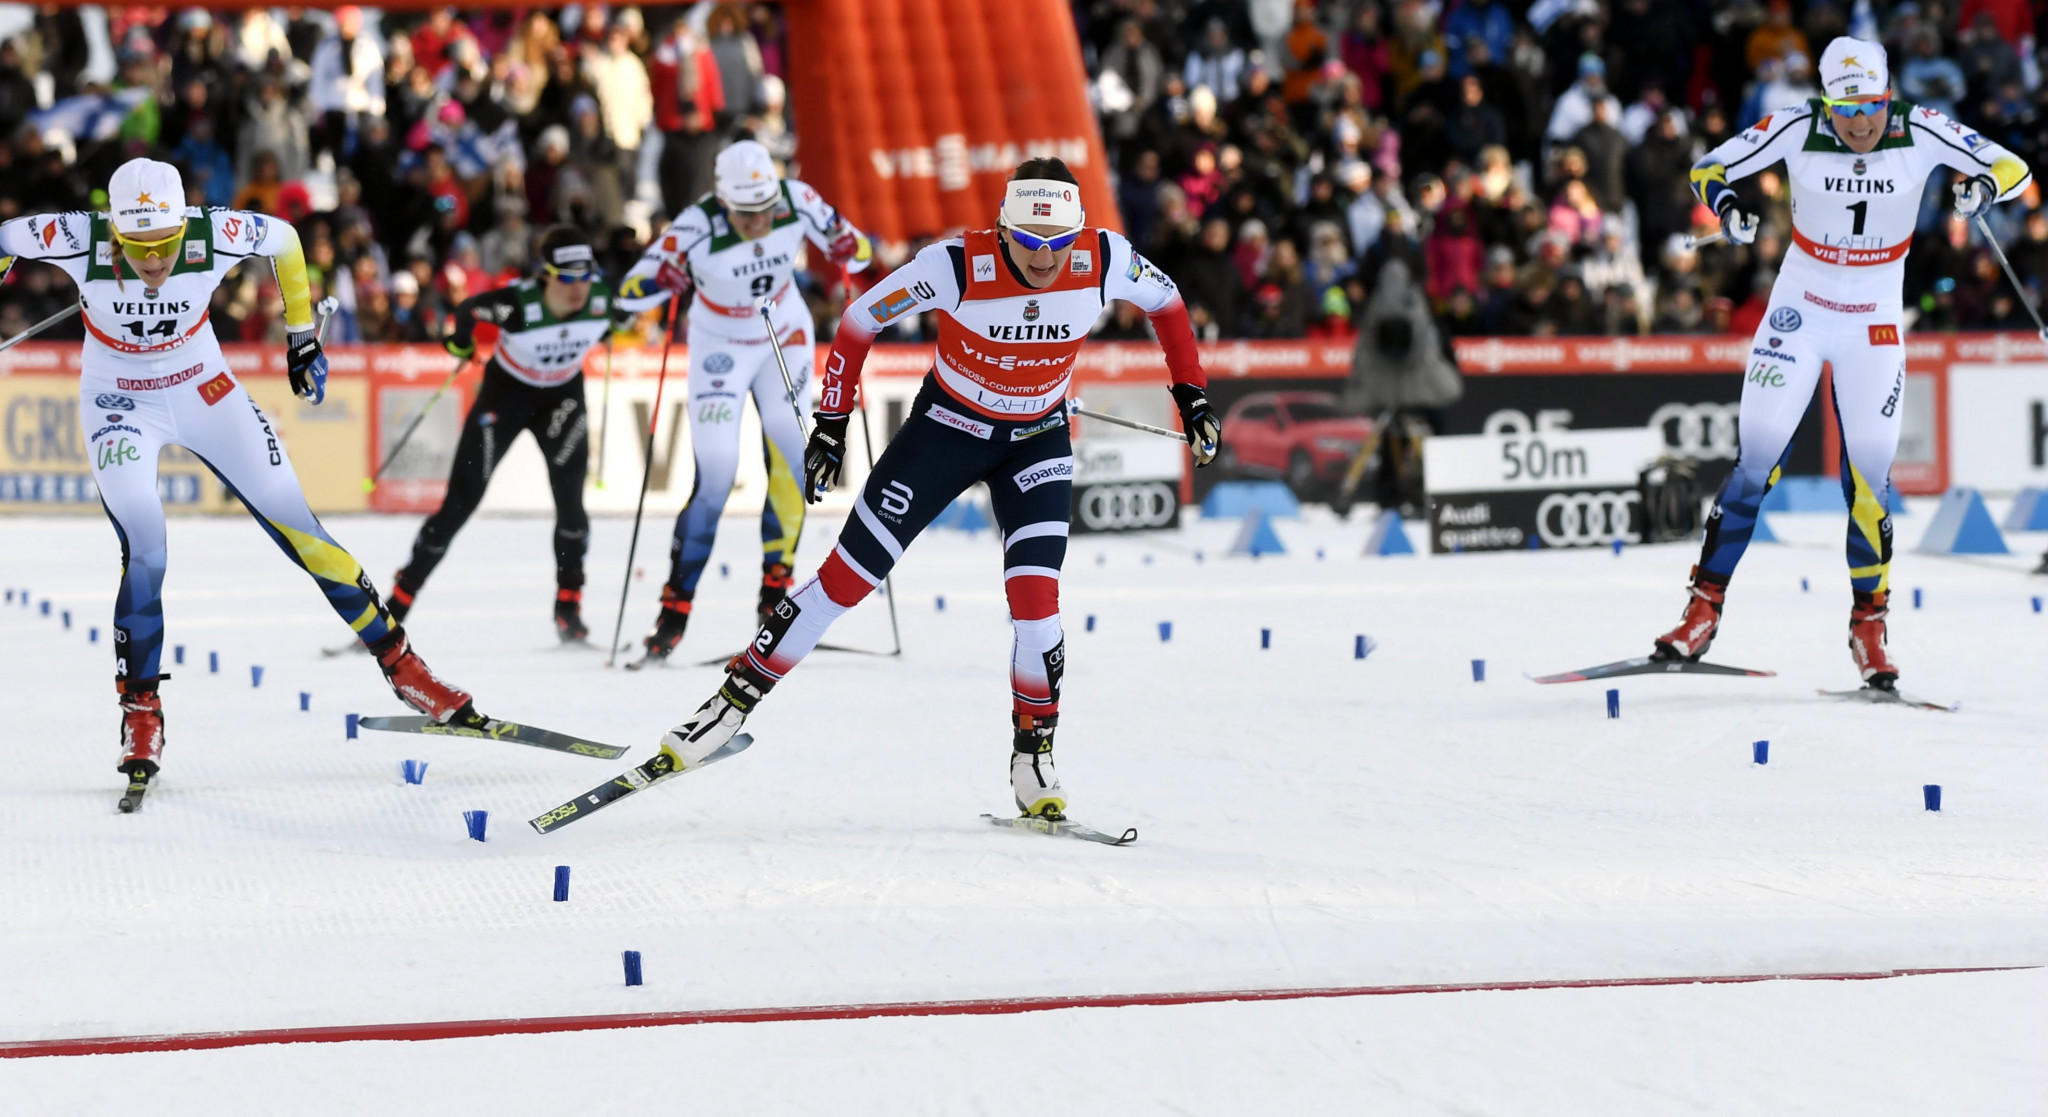 Maiken Caspersen Falla of Norway could wrap up the women's overall sprint title when she competes in the penultimate race of the season ©Getty Images